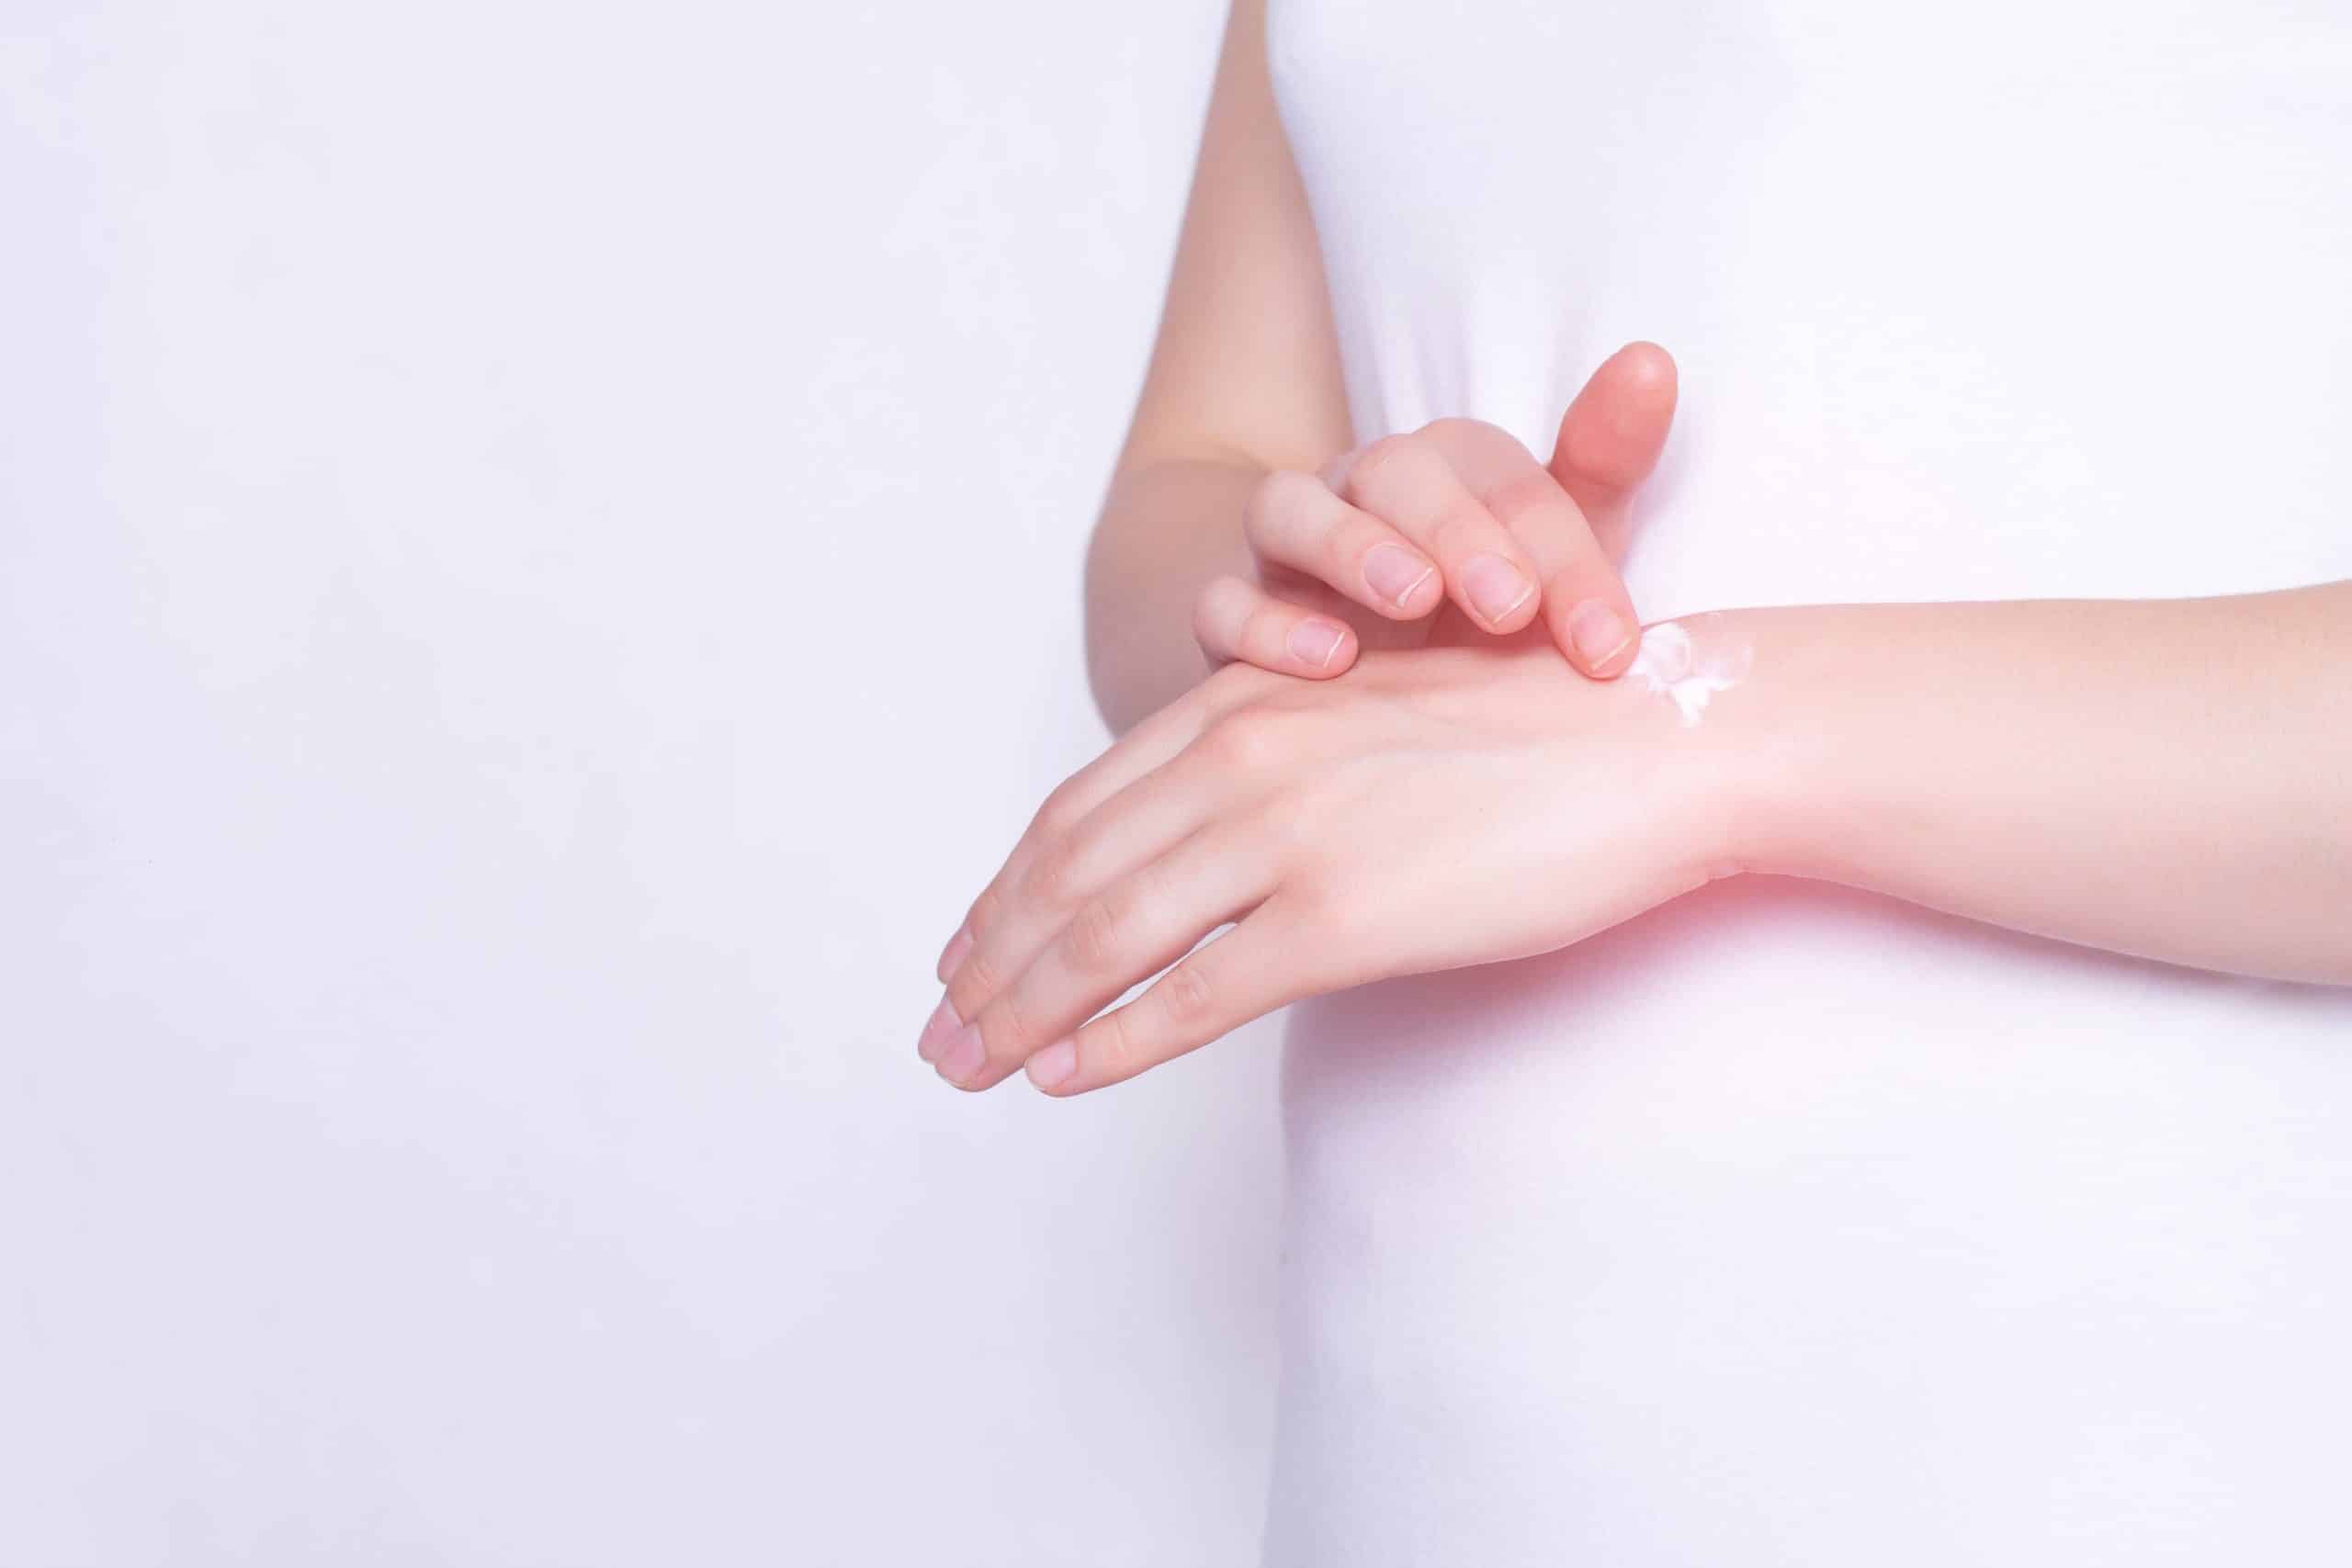 The girl rubs the healing ointment into the wrist joint against pain and inflammation in the joint, White background, copy space